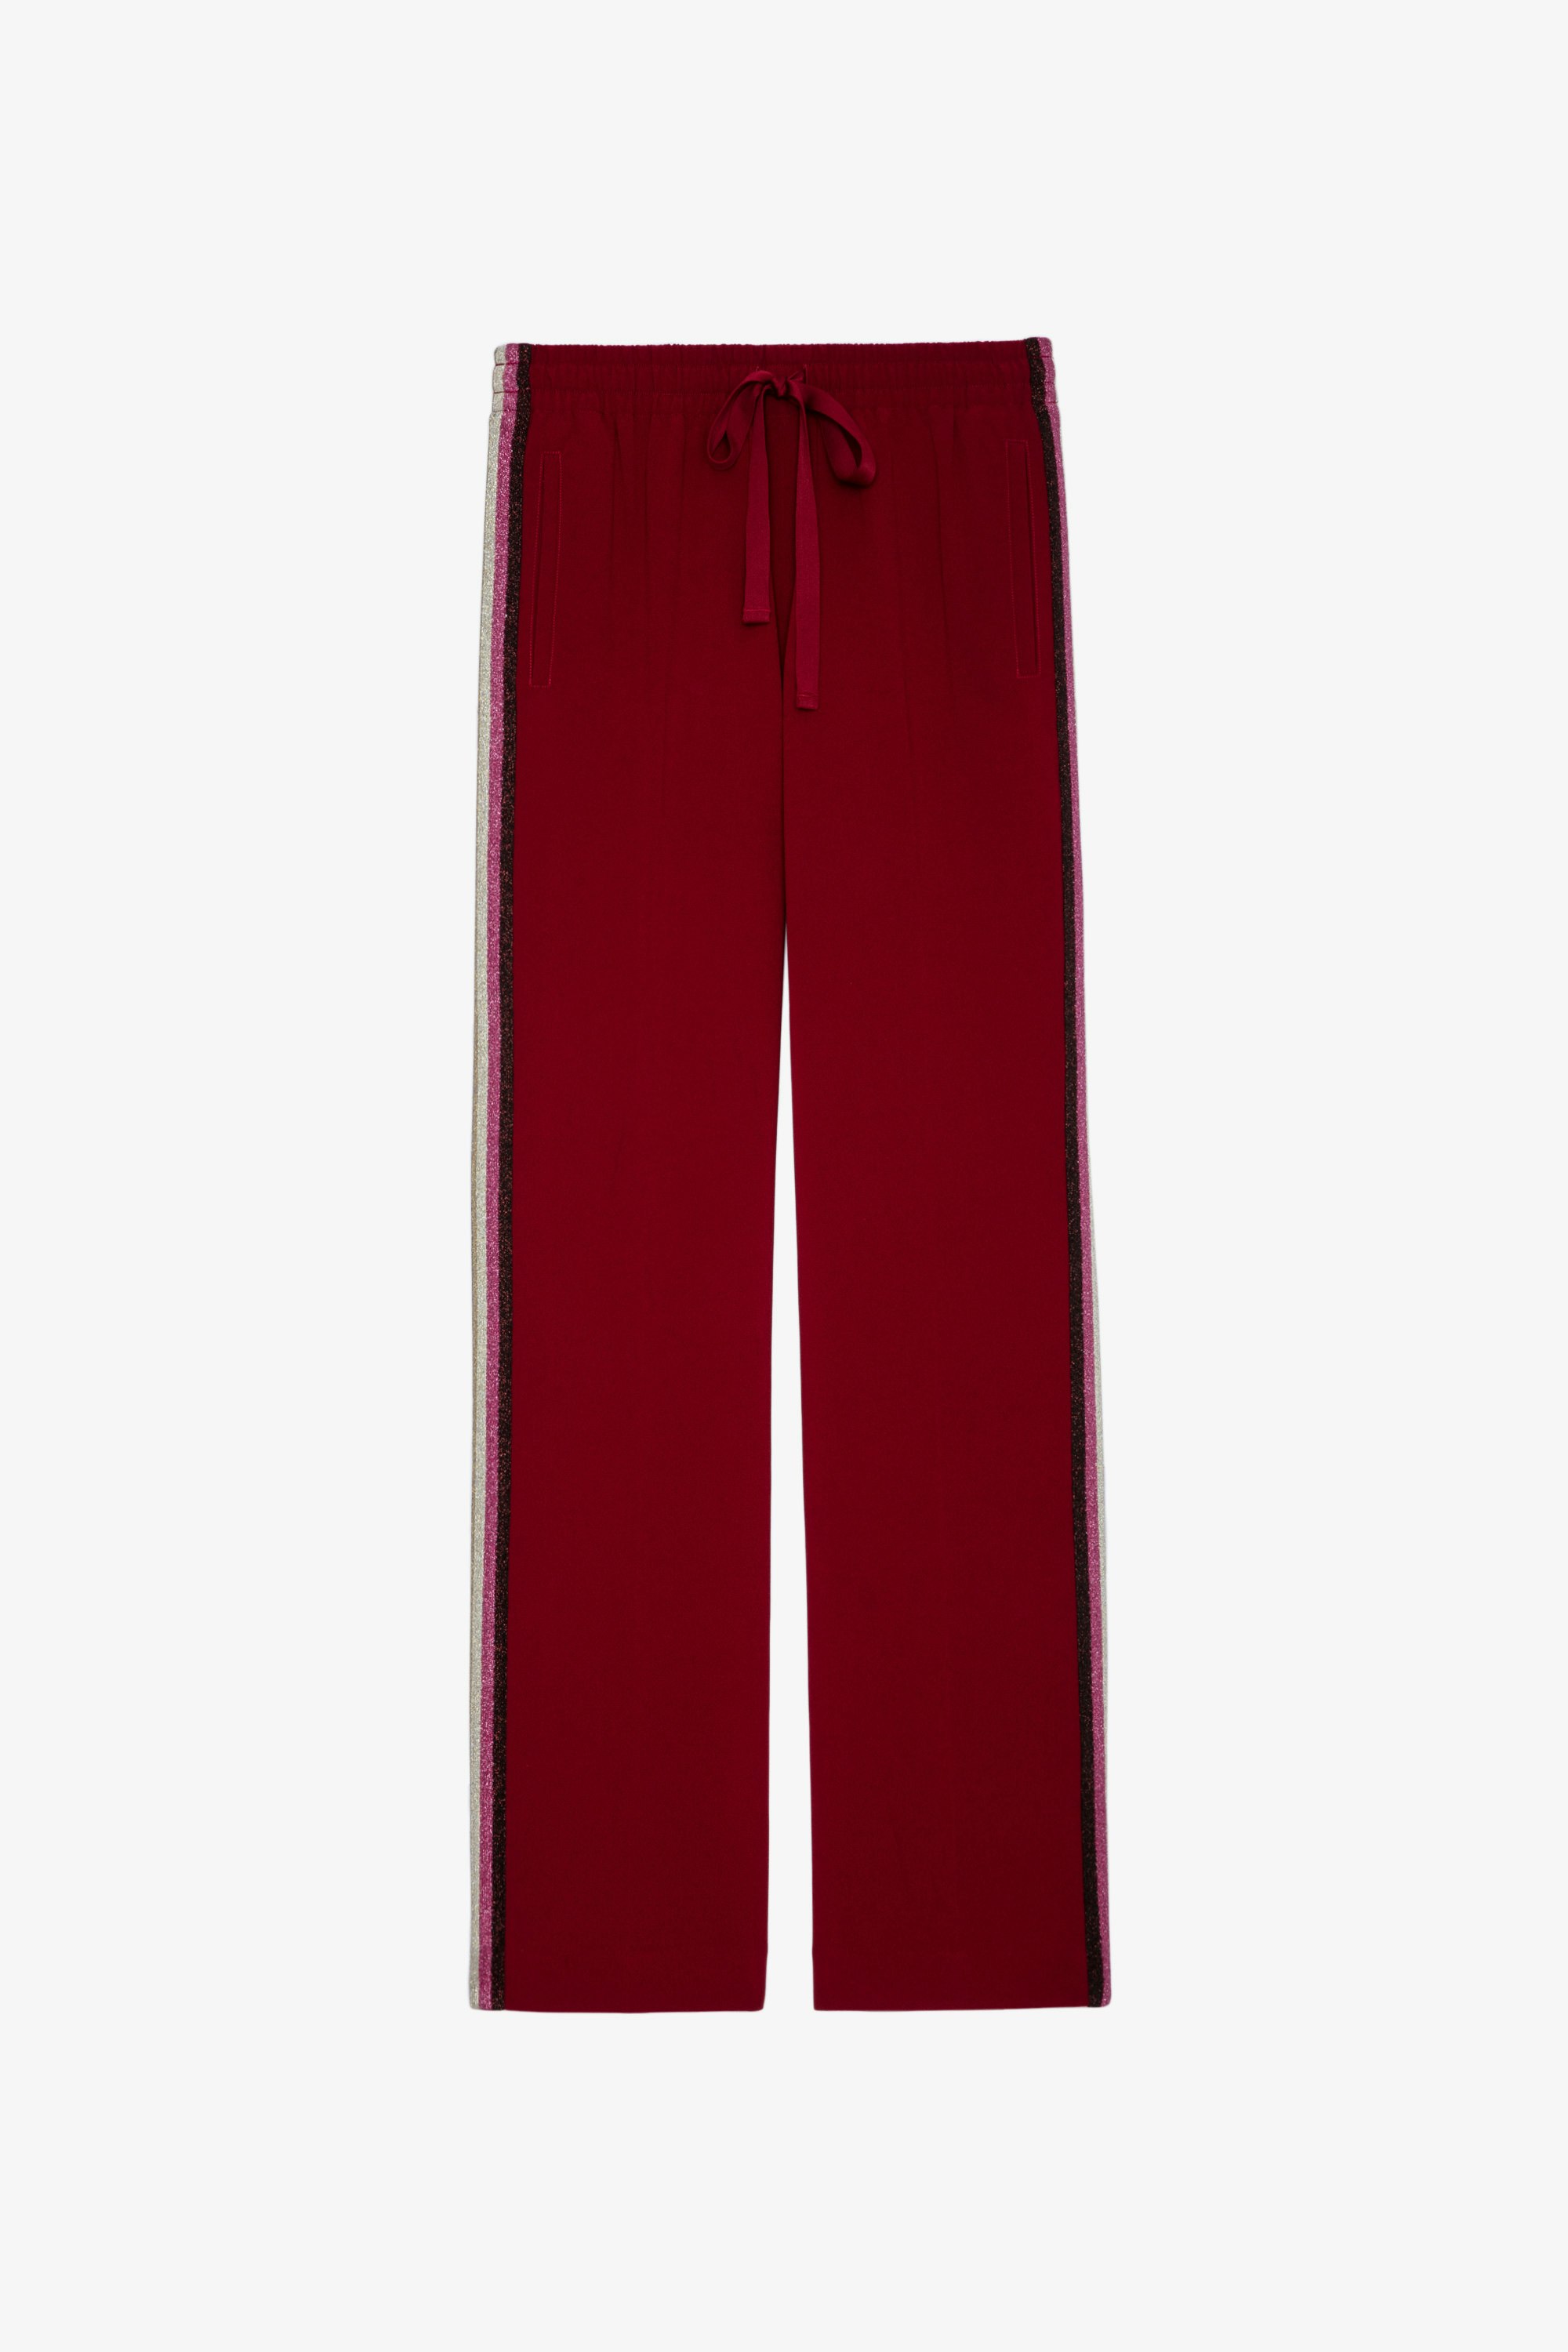 Pomy Crepe パンツ Women’s trousers with coloured glitter side bands